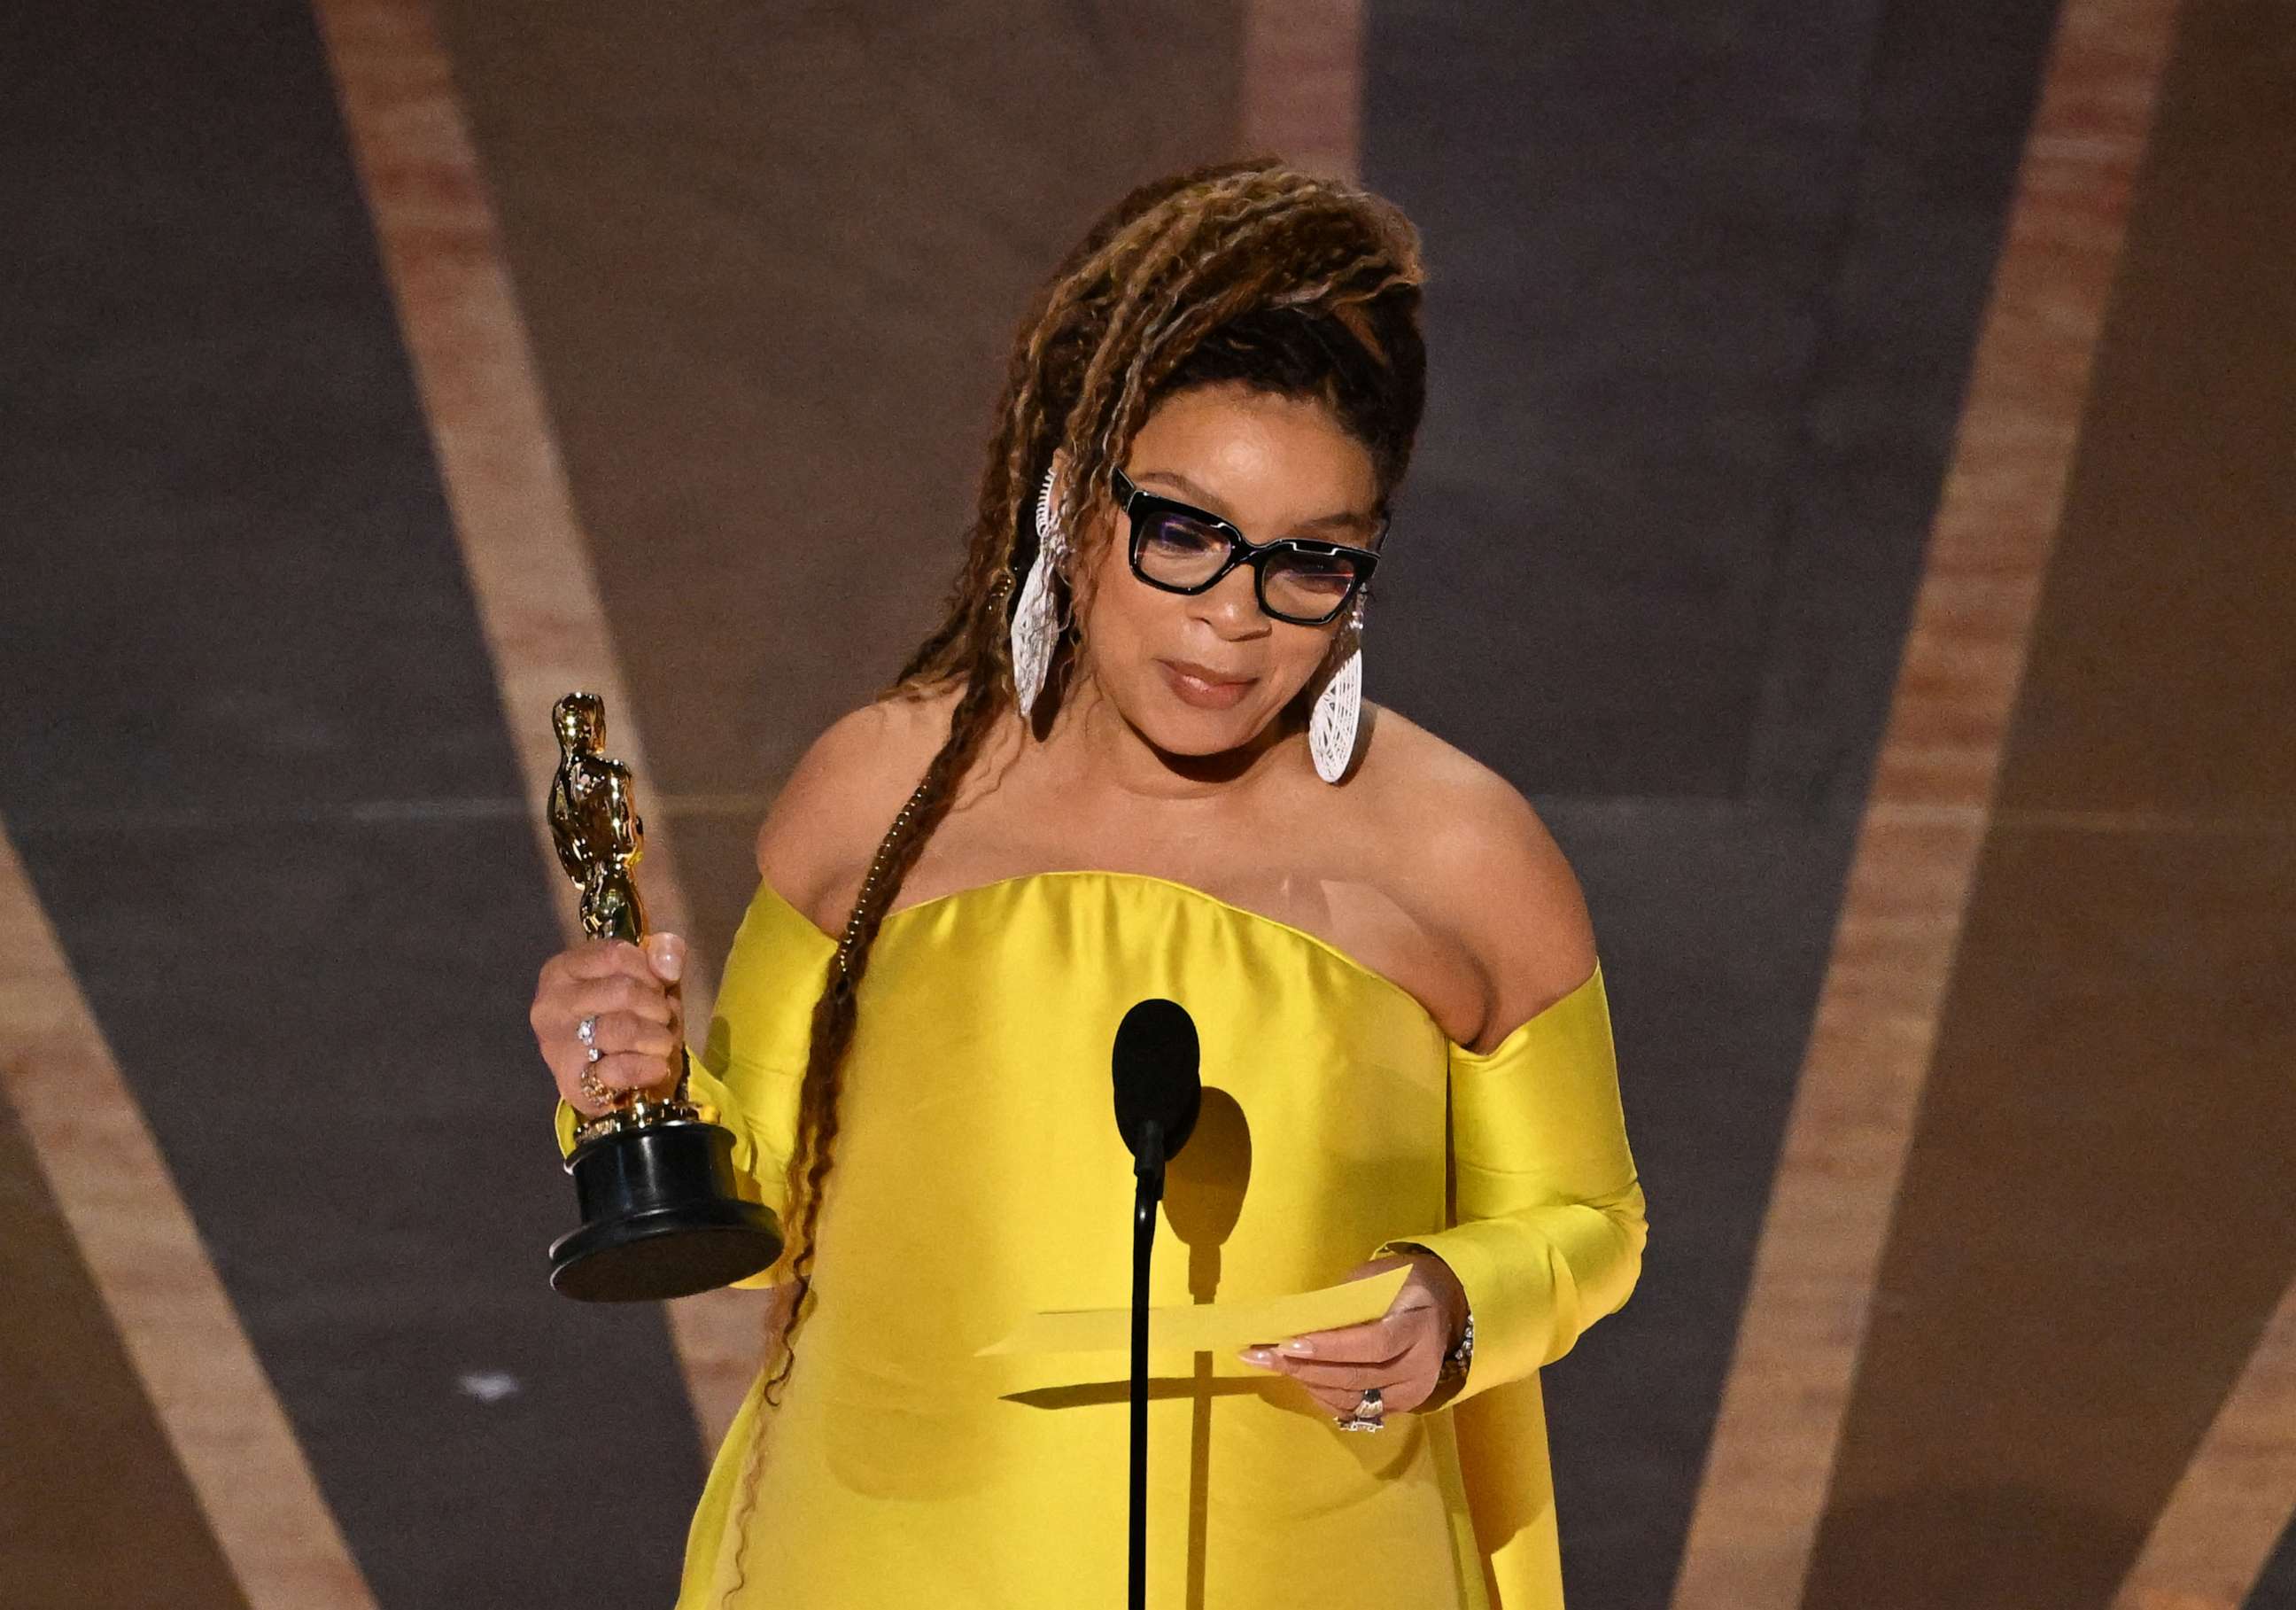 PHOTO: Ruth E. Carter accepts the Oscar for Best Costume Design for "Black Panther: Wakanda Forever" onstage during the 95th Annual Academy Awards at the Dolby Theatre in Hollywood, California on March 12, 2023.